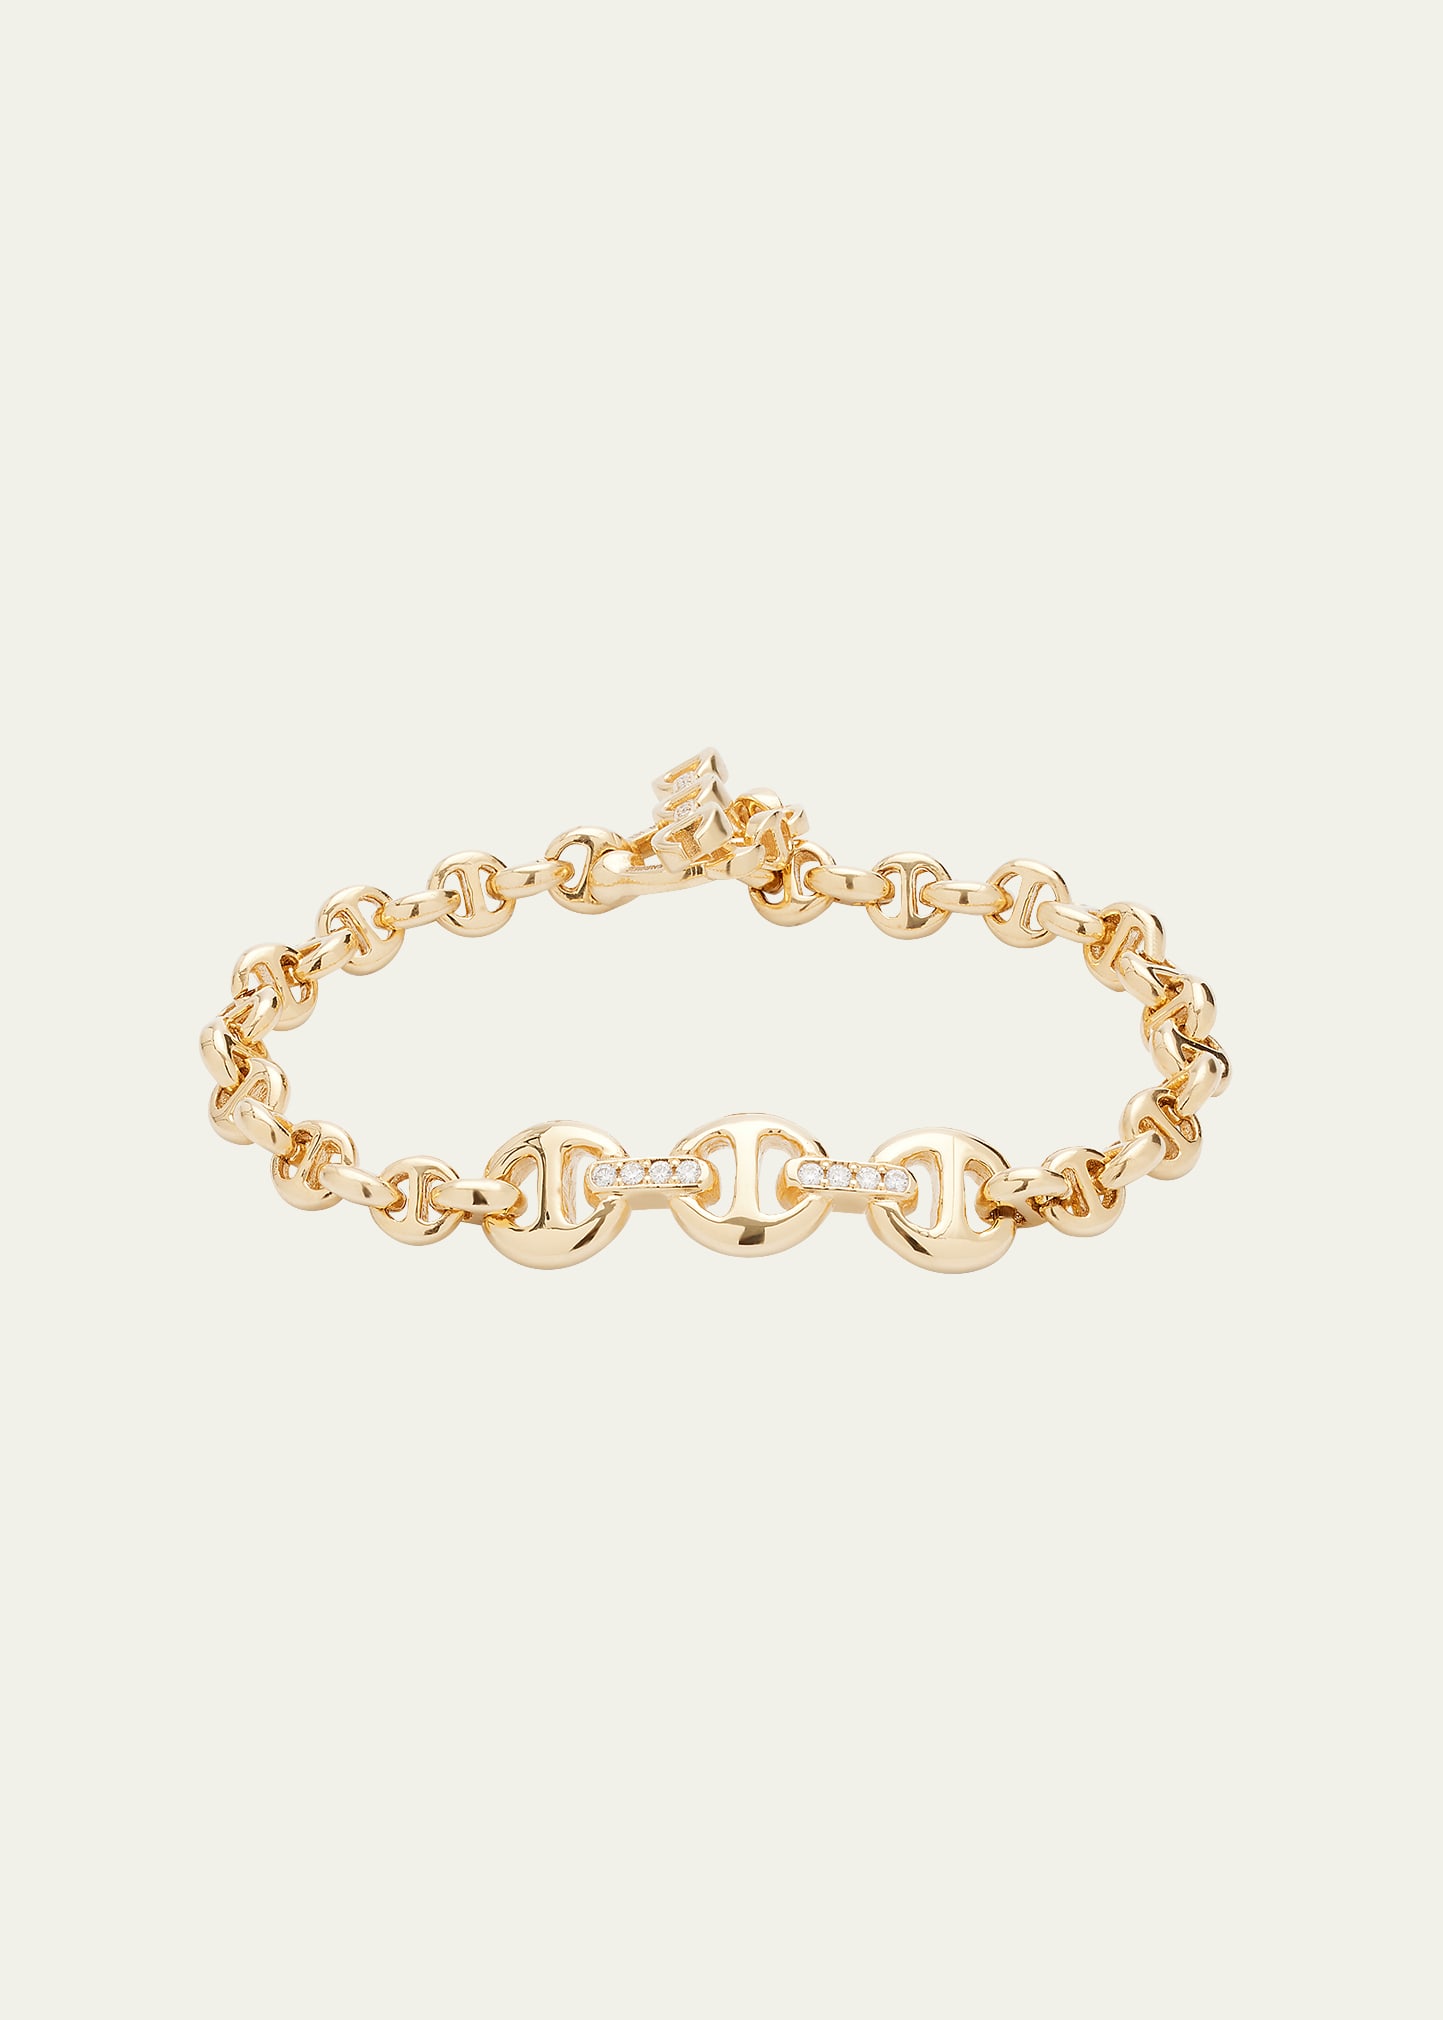 ID Bracelet in 18K Gold with Diamond Bridges and Toggle